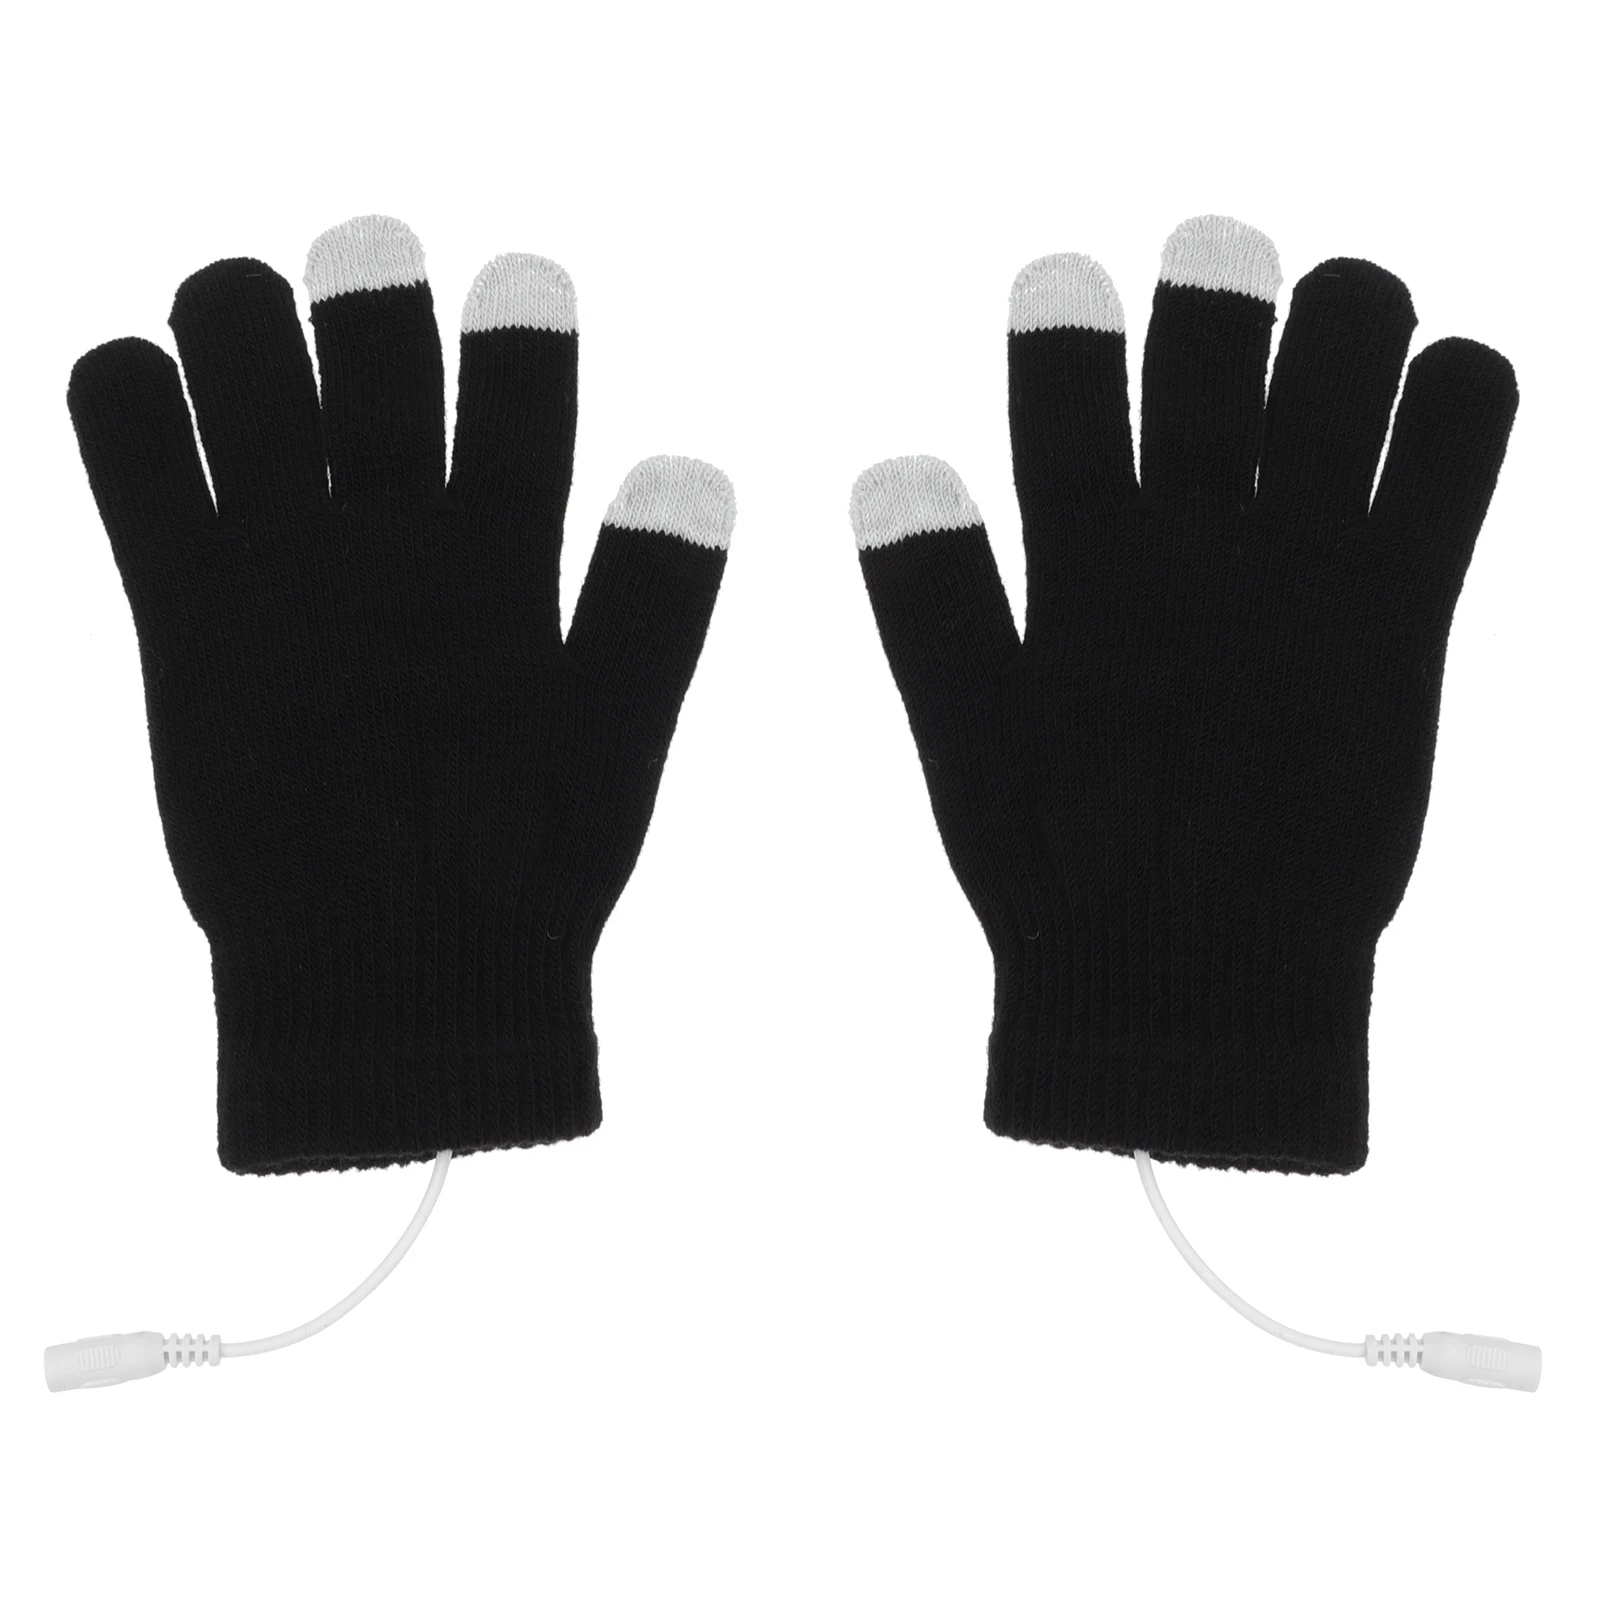 Heating Gloves USB Heated Touch Screen Mittens Cotton Gloves Unisex Winter Typing Touch Screen Cold Protective Hand Gloves new punk gloves unisex halloween skeleton skull gloves smartphone touch screen stretch knitted winter mittens